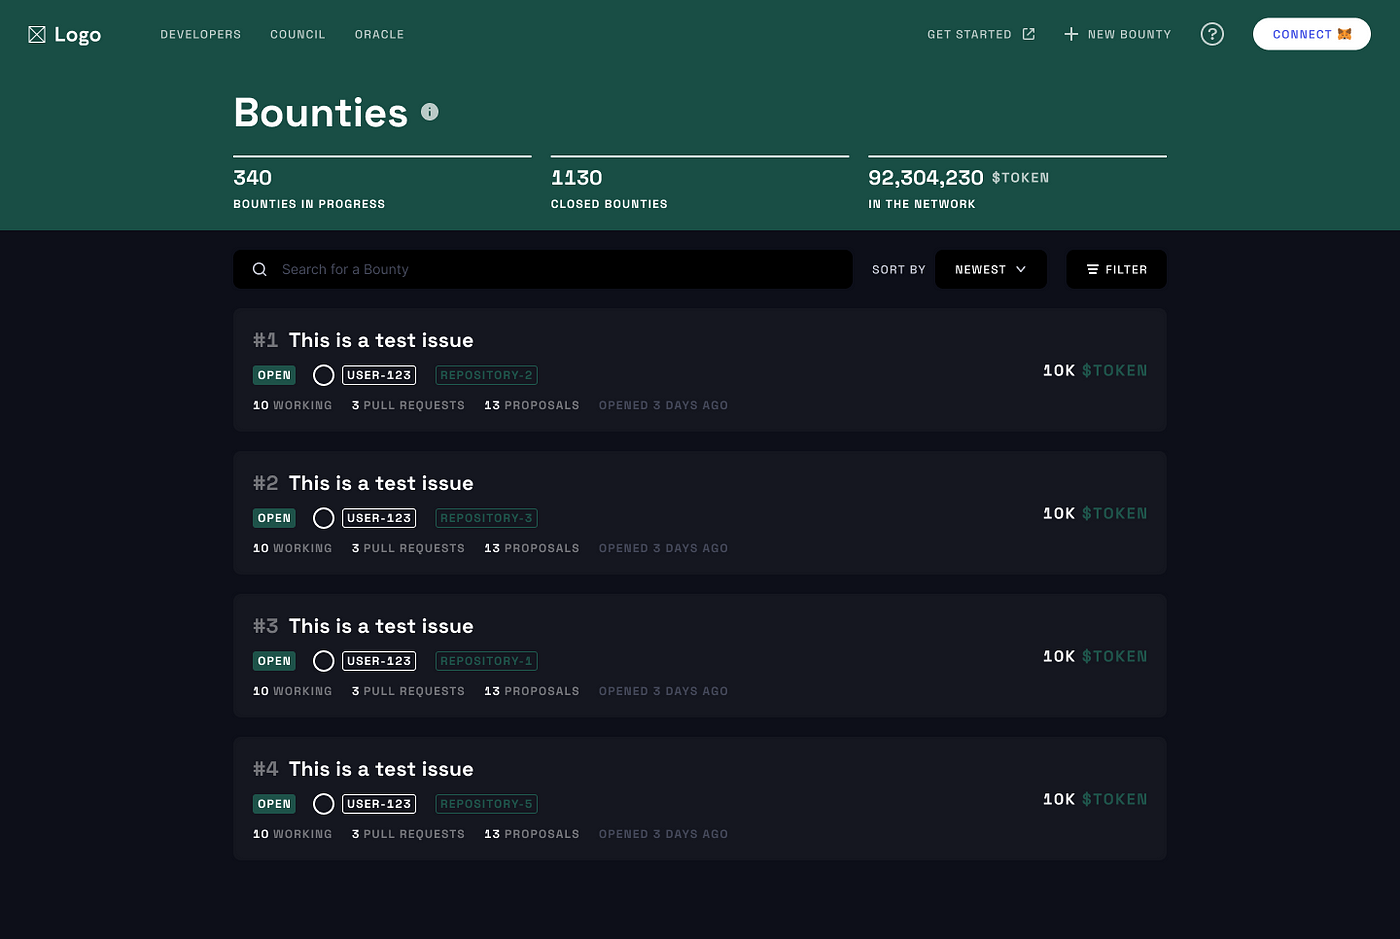 Keep track of the bounties on your Network in a more organized manner